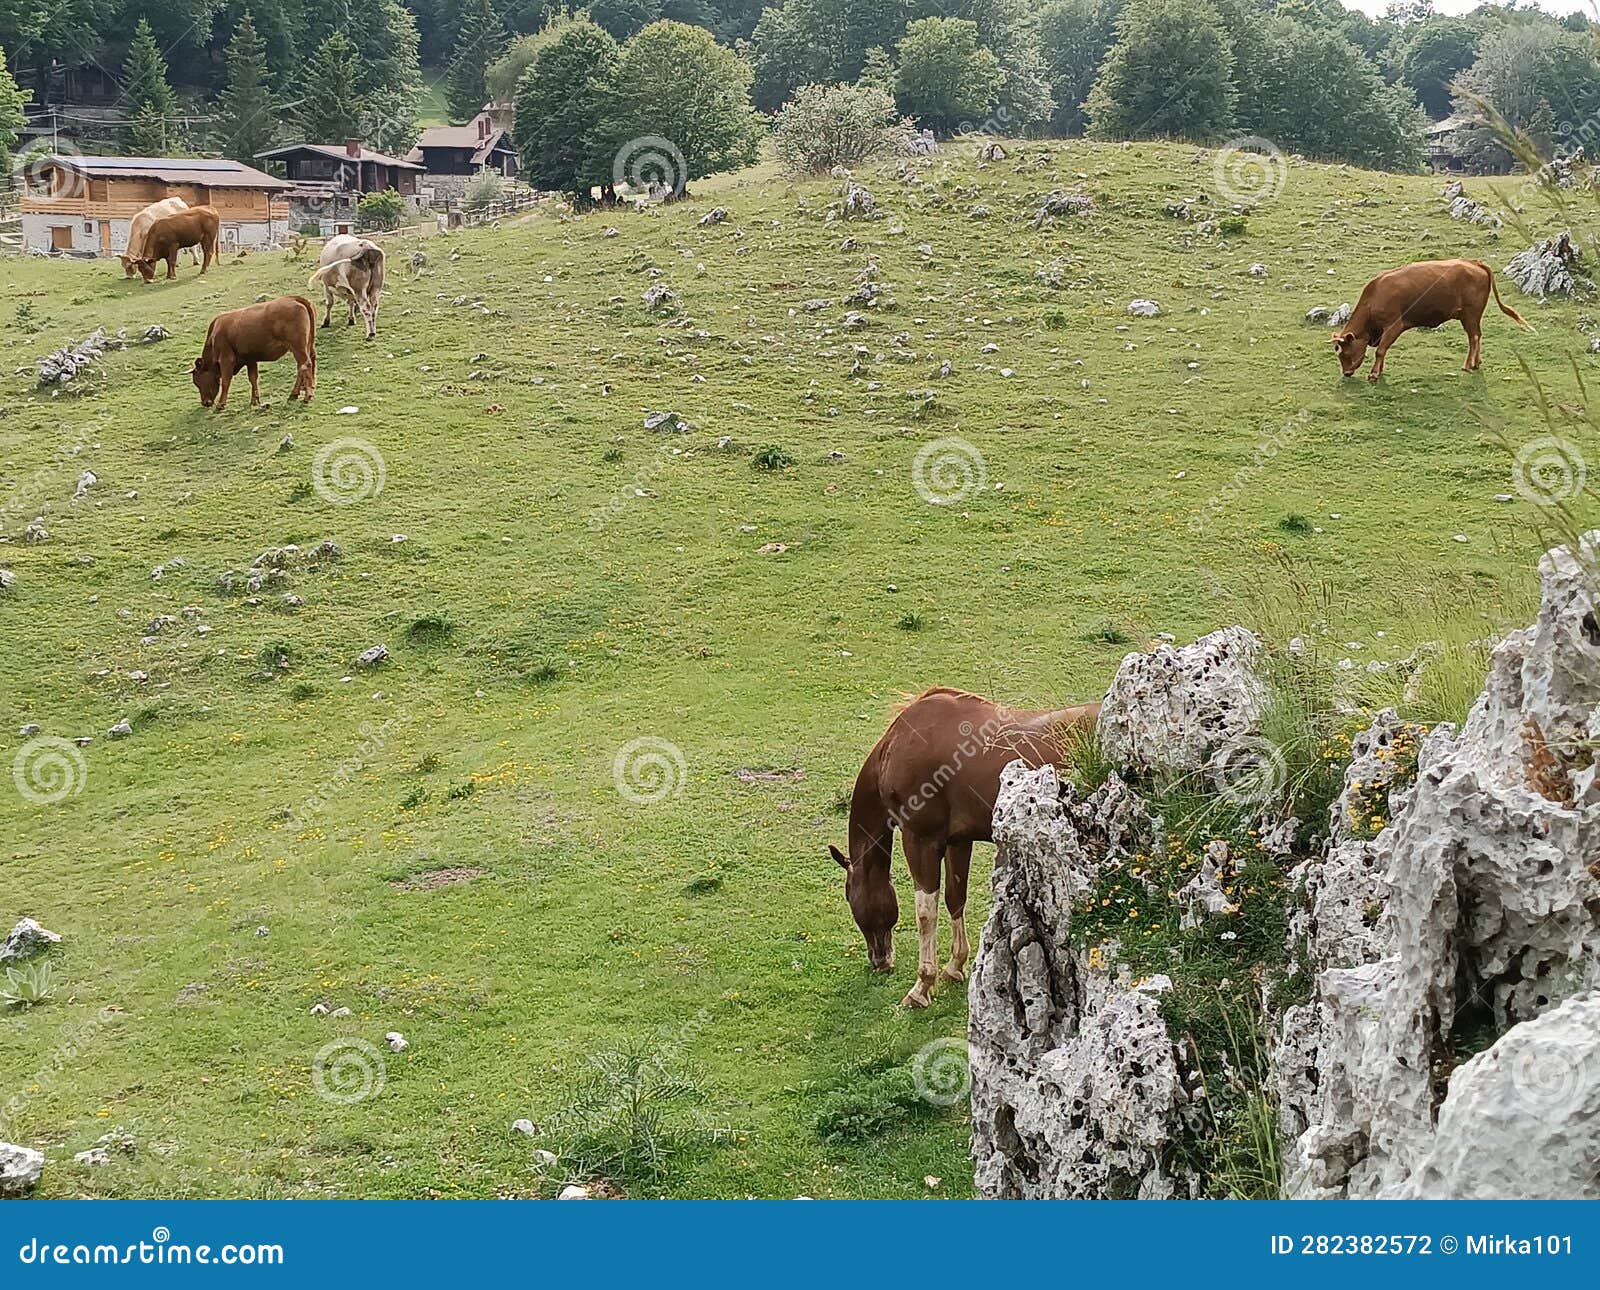 wild horses and cows graze together on the fresh green grass